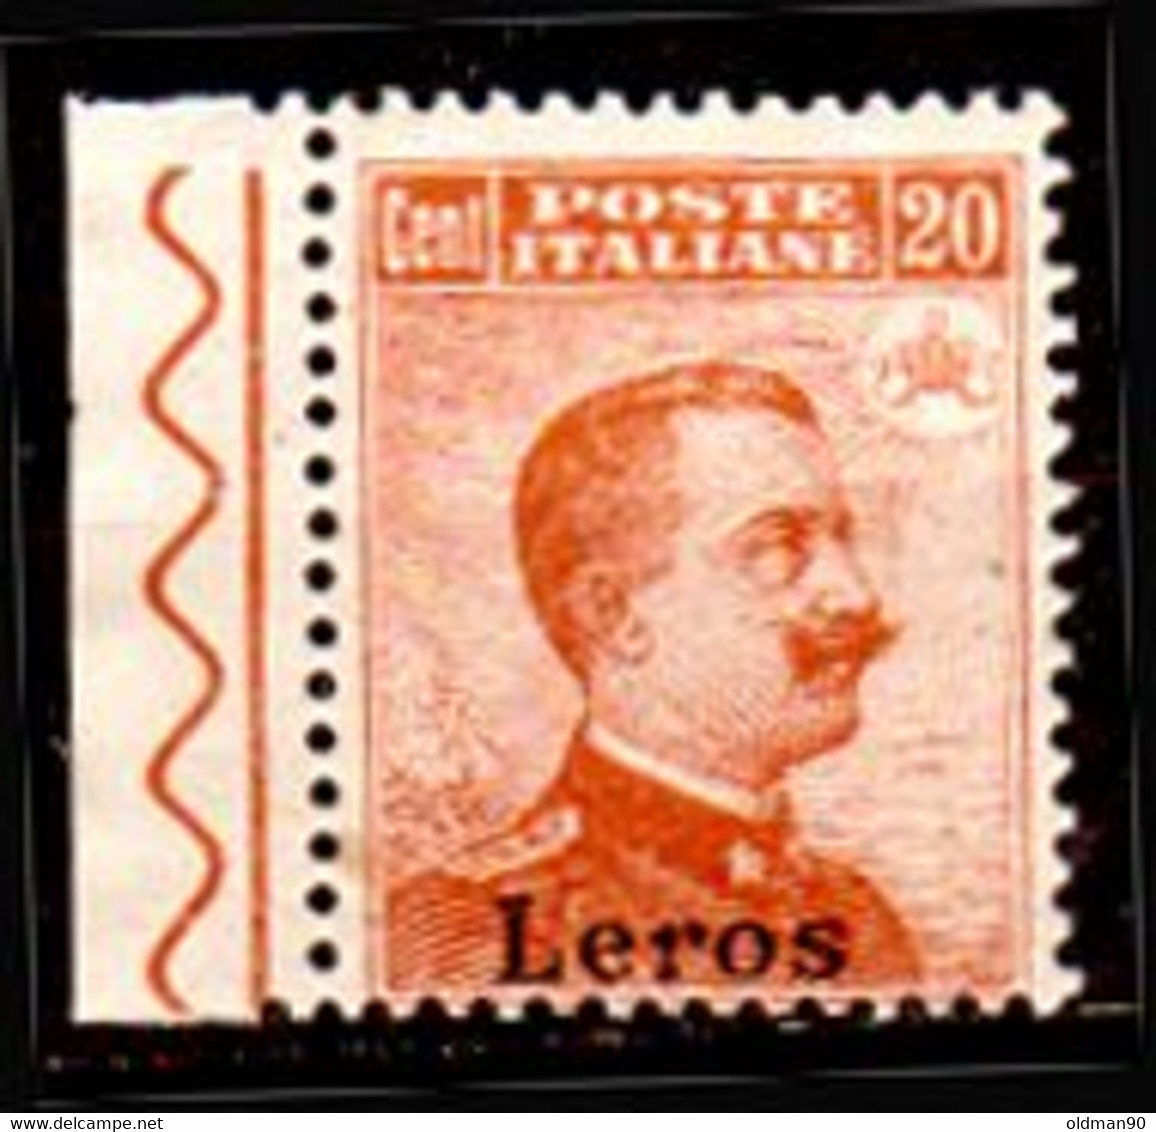 Egeo-OS-291- Lero: Original Stamp And Overprint 1917 (++) MNH - Quality In Your Opinion. - Egée (Coo)